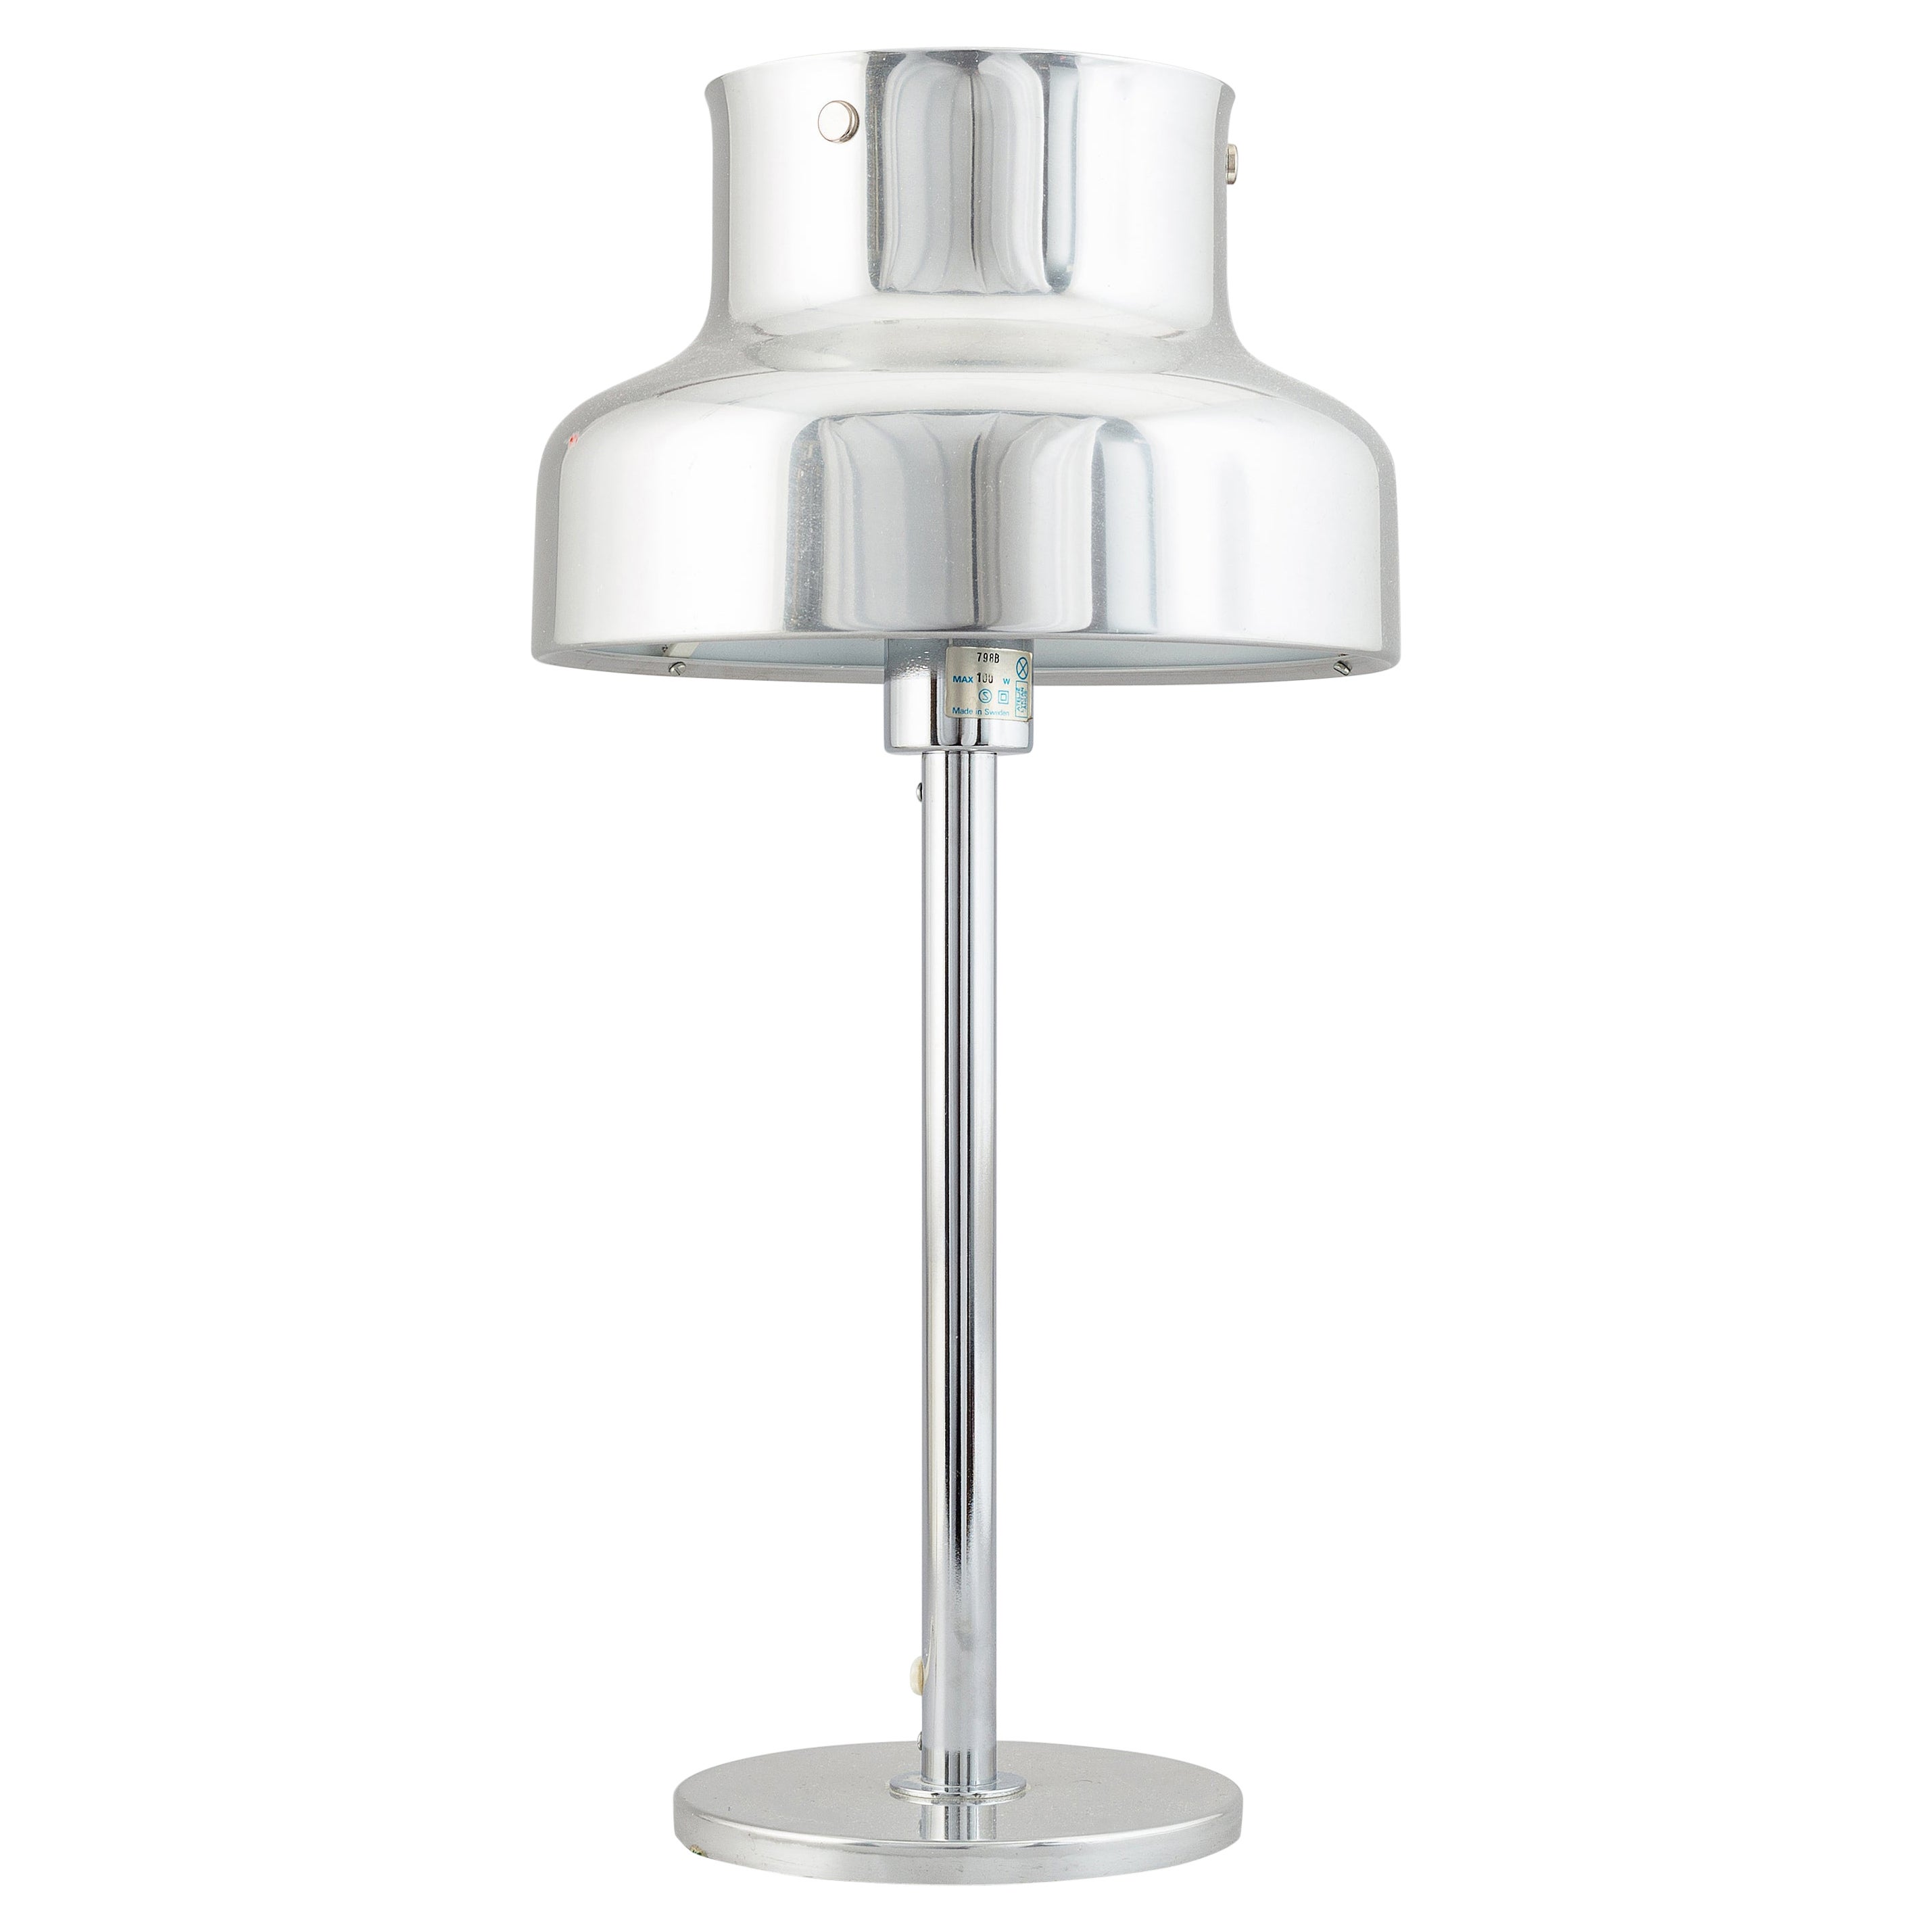 Anders Pehrson "Bumling" Table Lamp in Chrome for Ateljé Lyktan, Sweden, 1960s